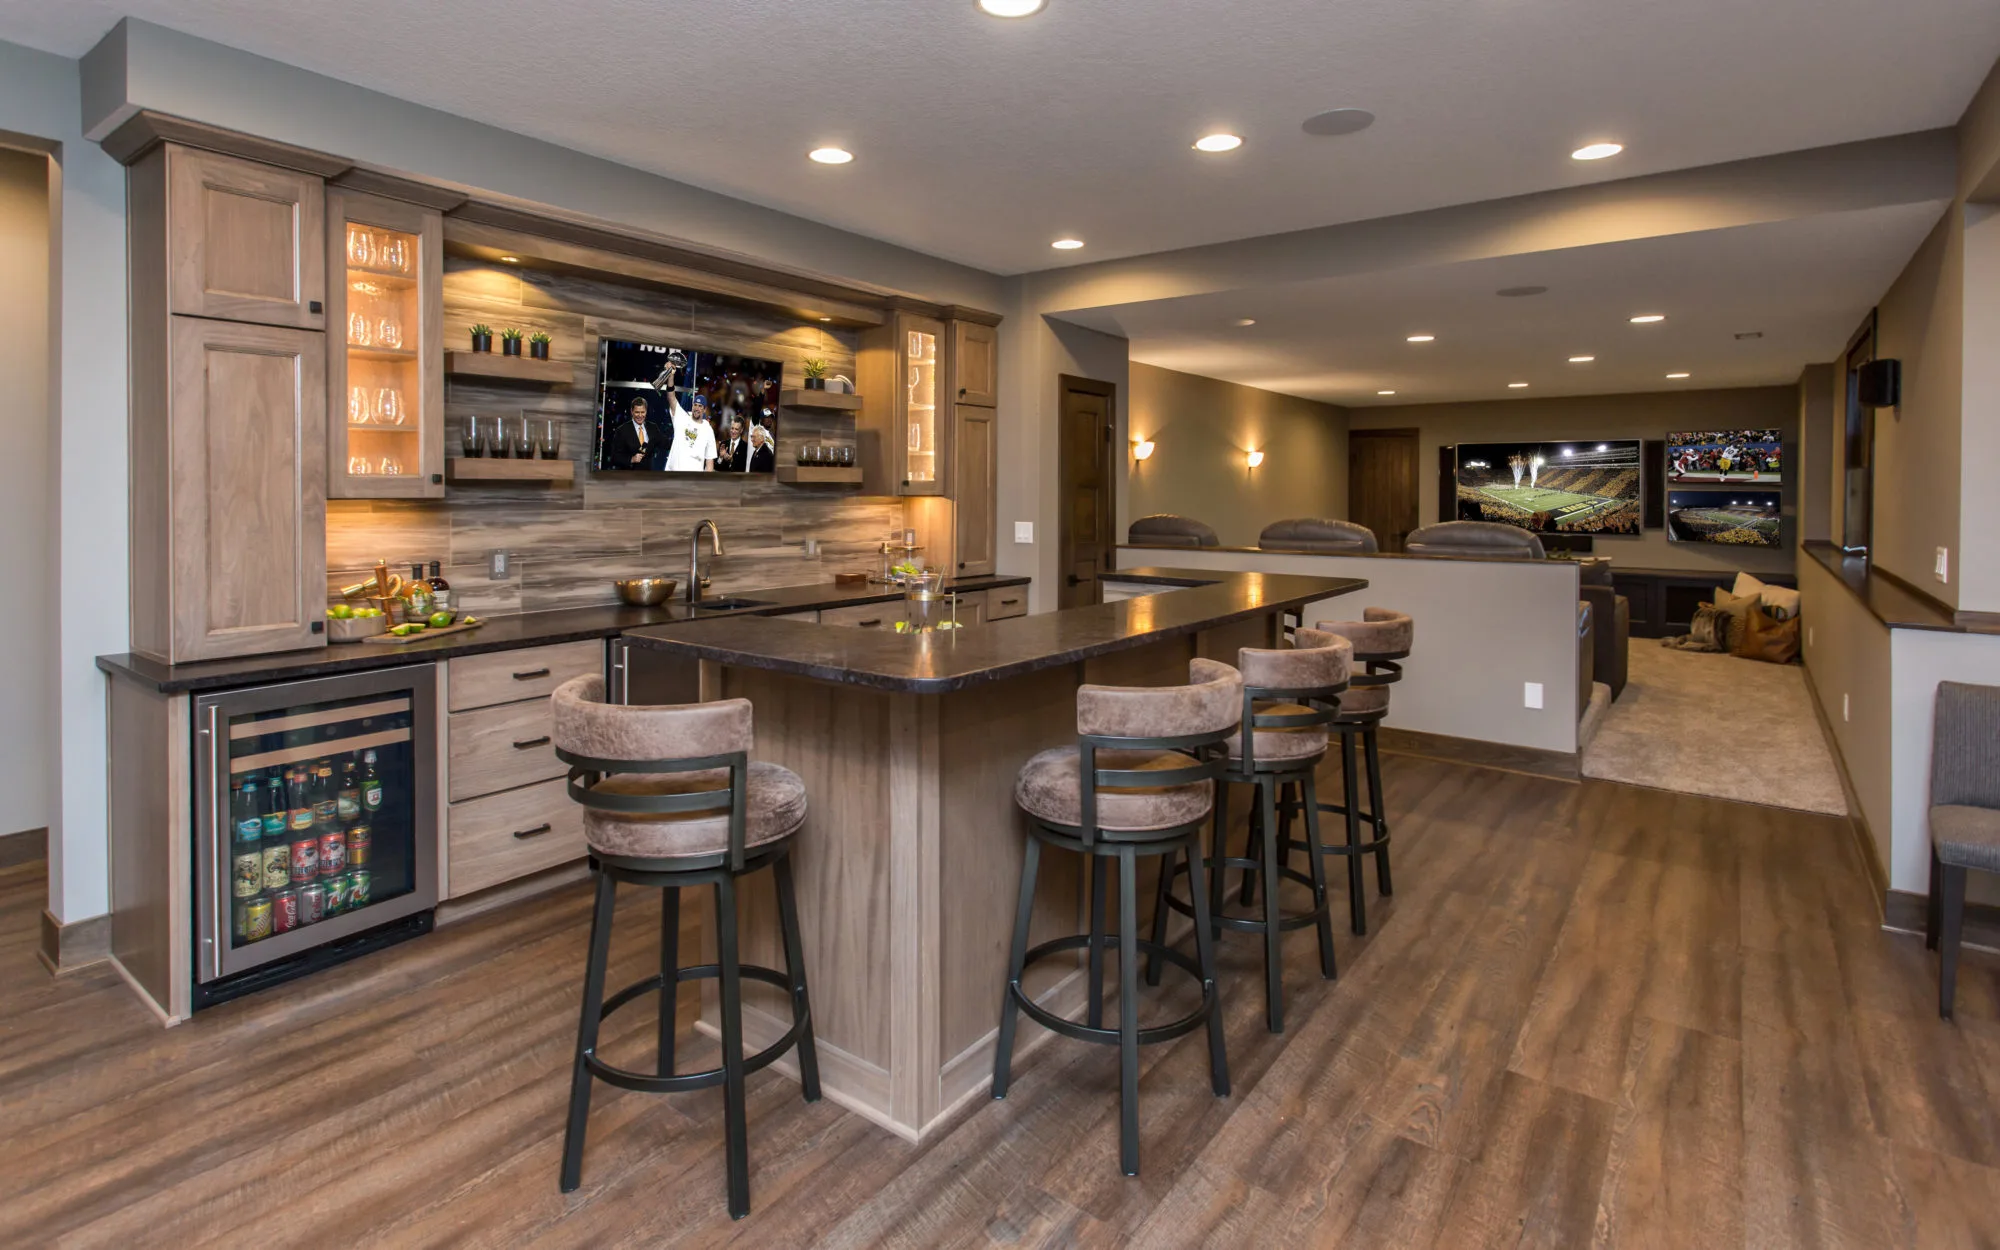 Basement Remodeling Differ From Finishing By Saww Group